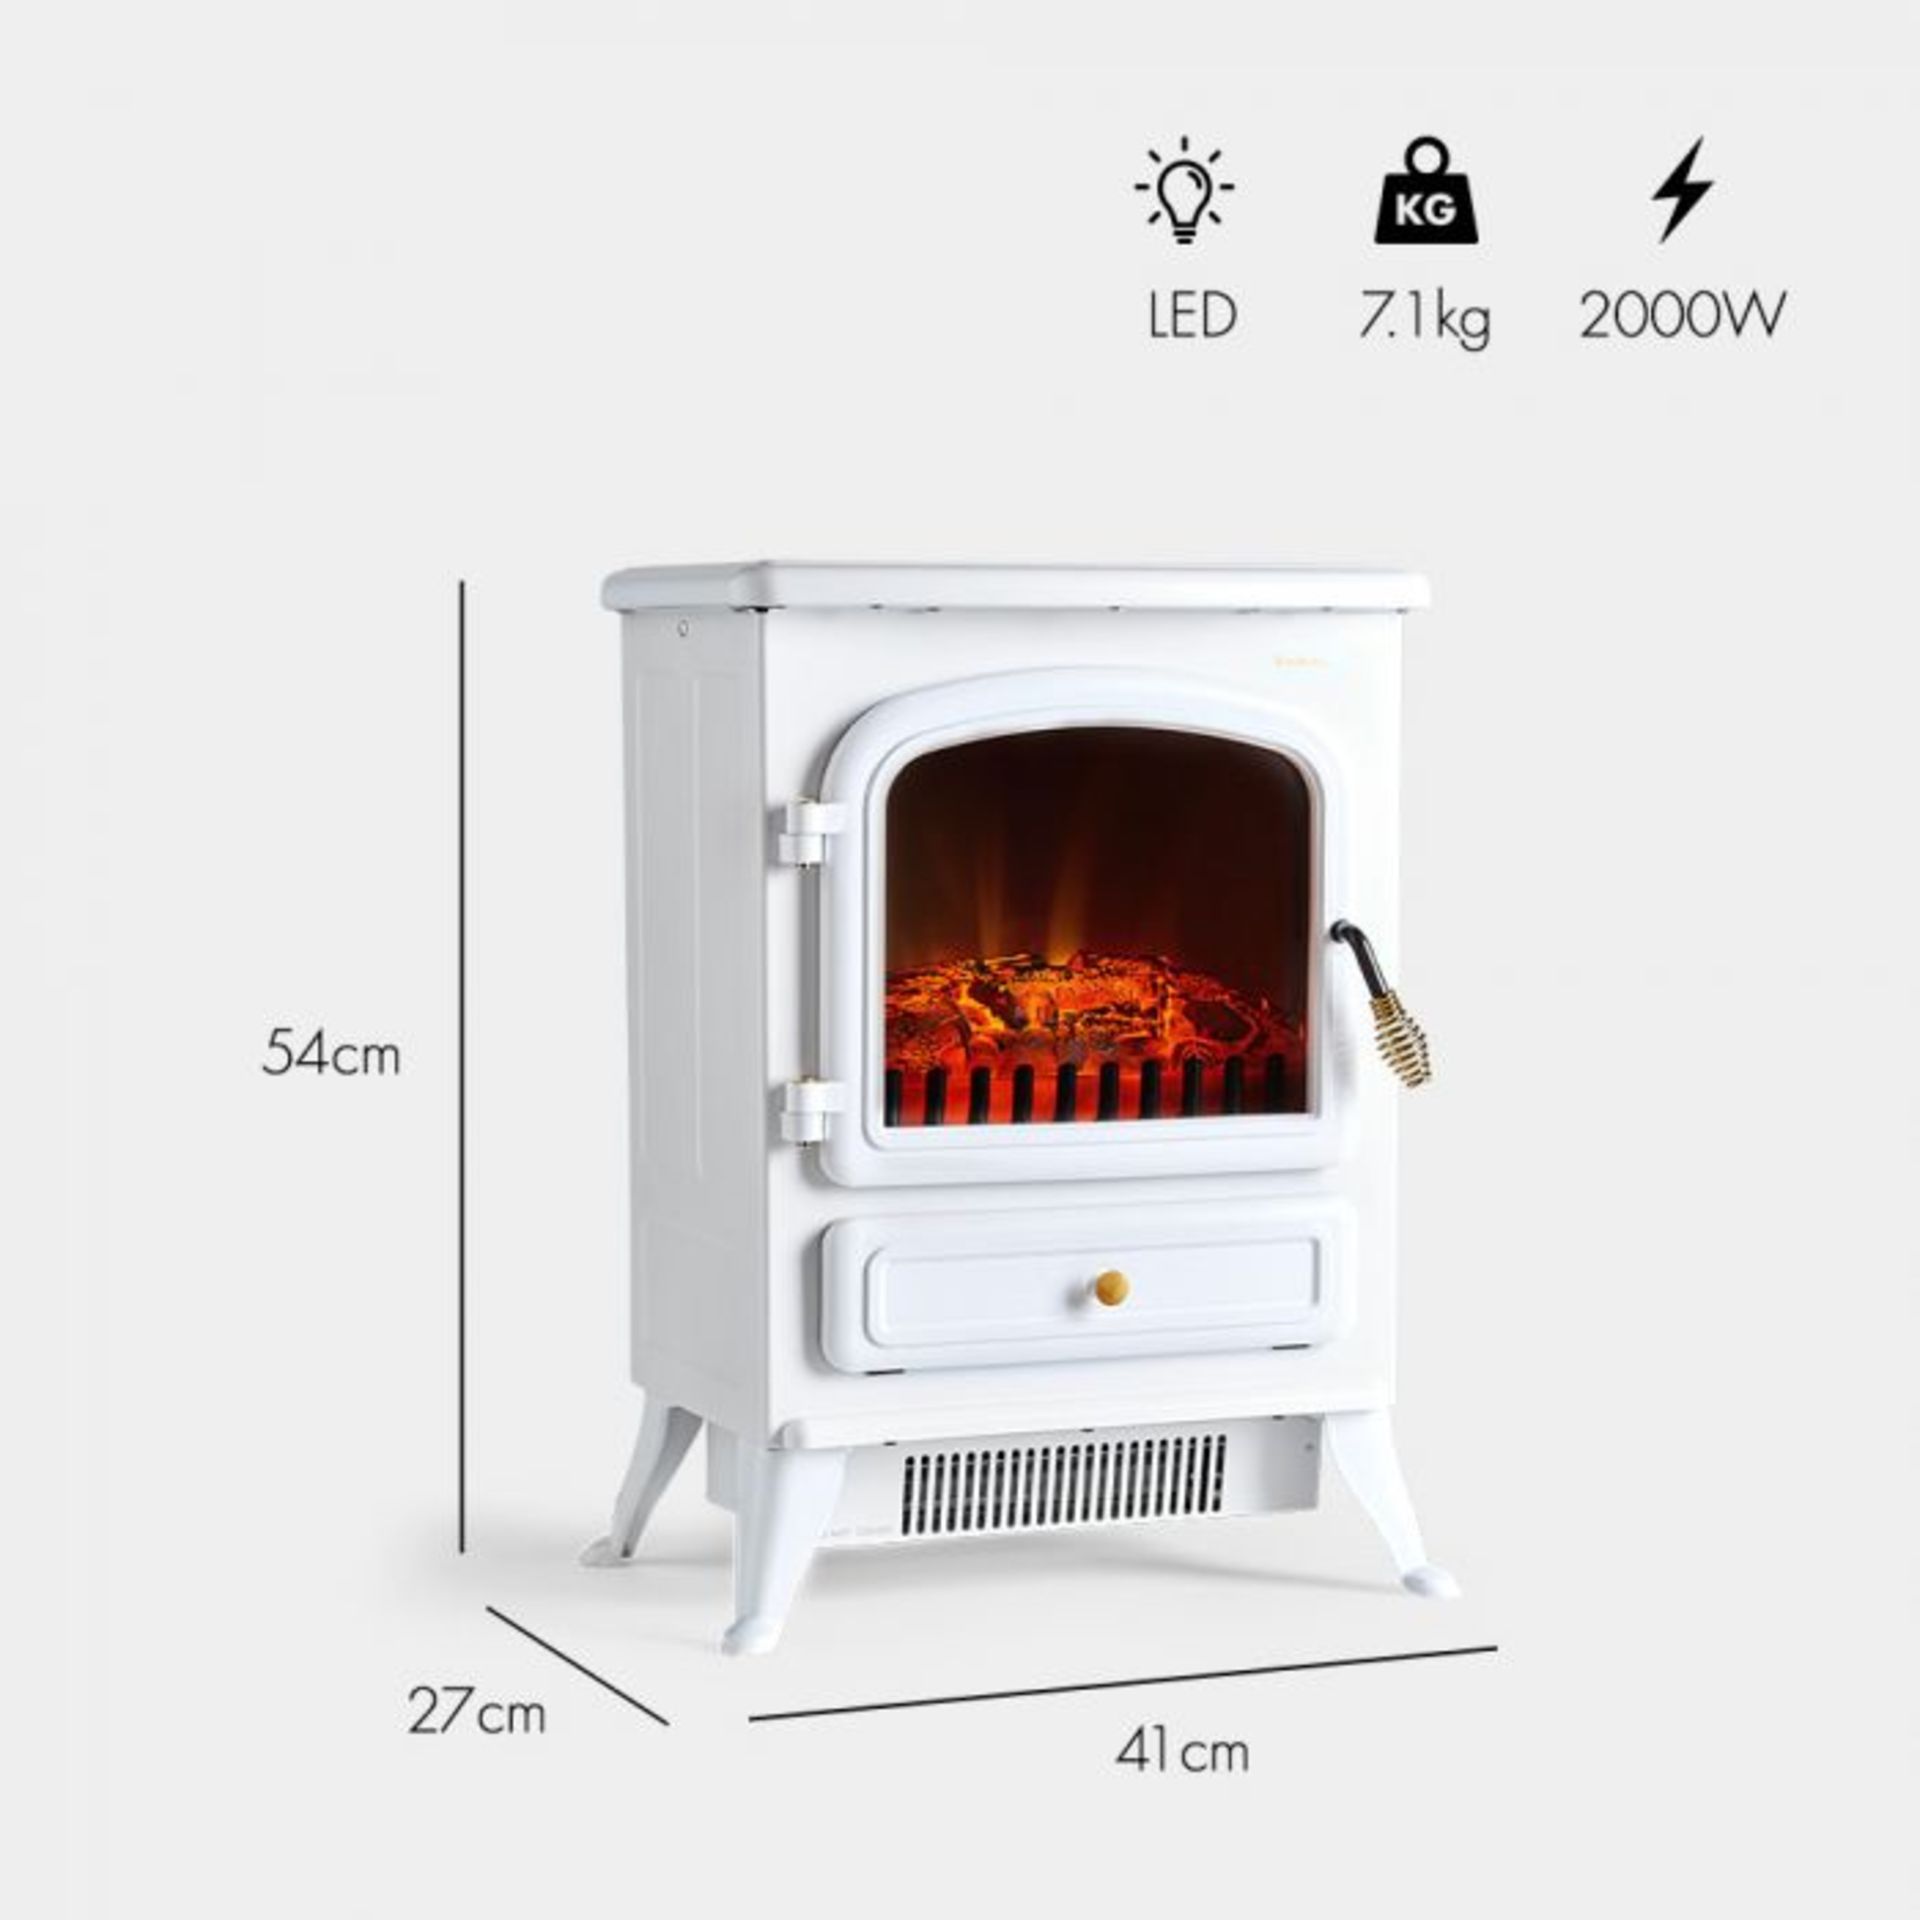 (V63) 1850W Portable Electric Stove Heater Beautifully designed freestanding small stove heate... - Image 4 of 4